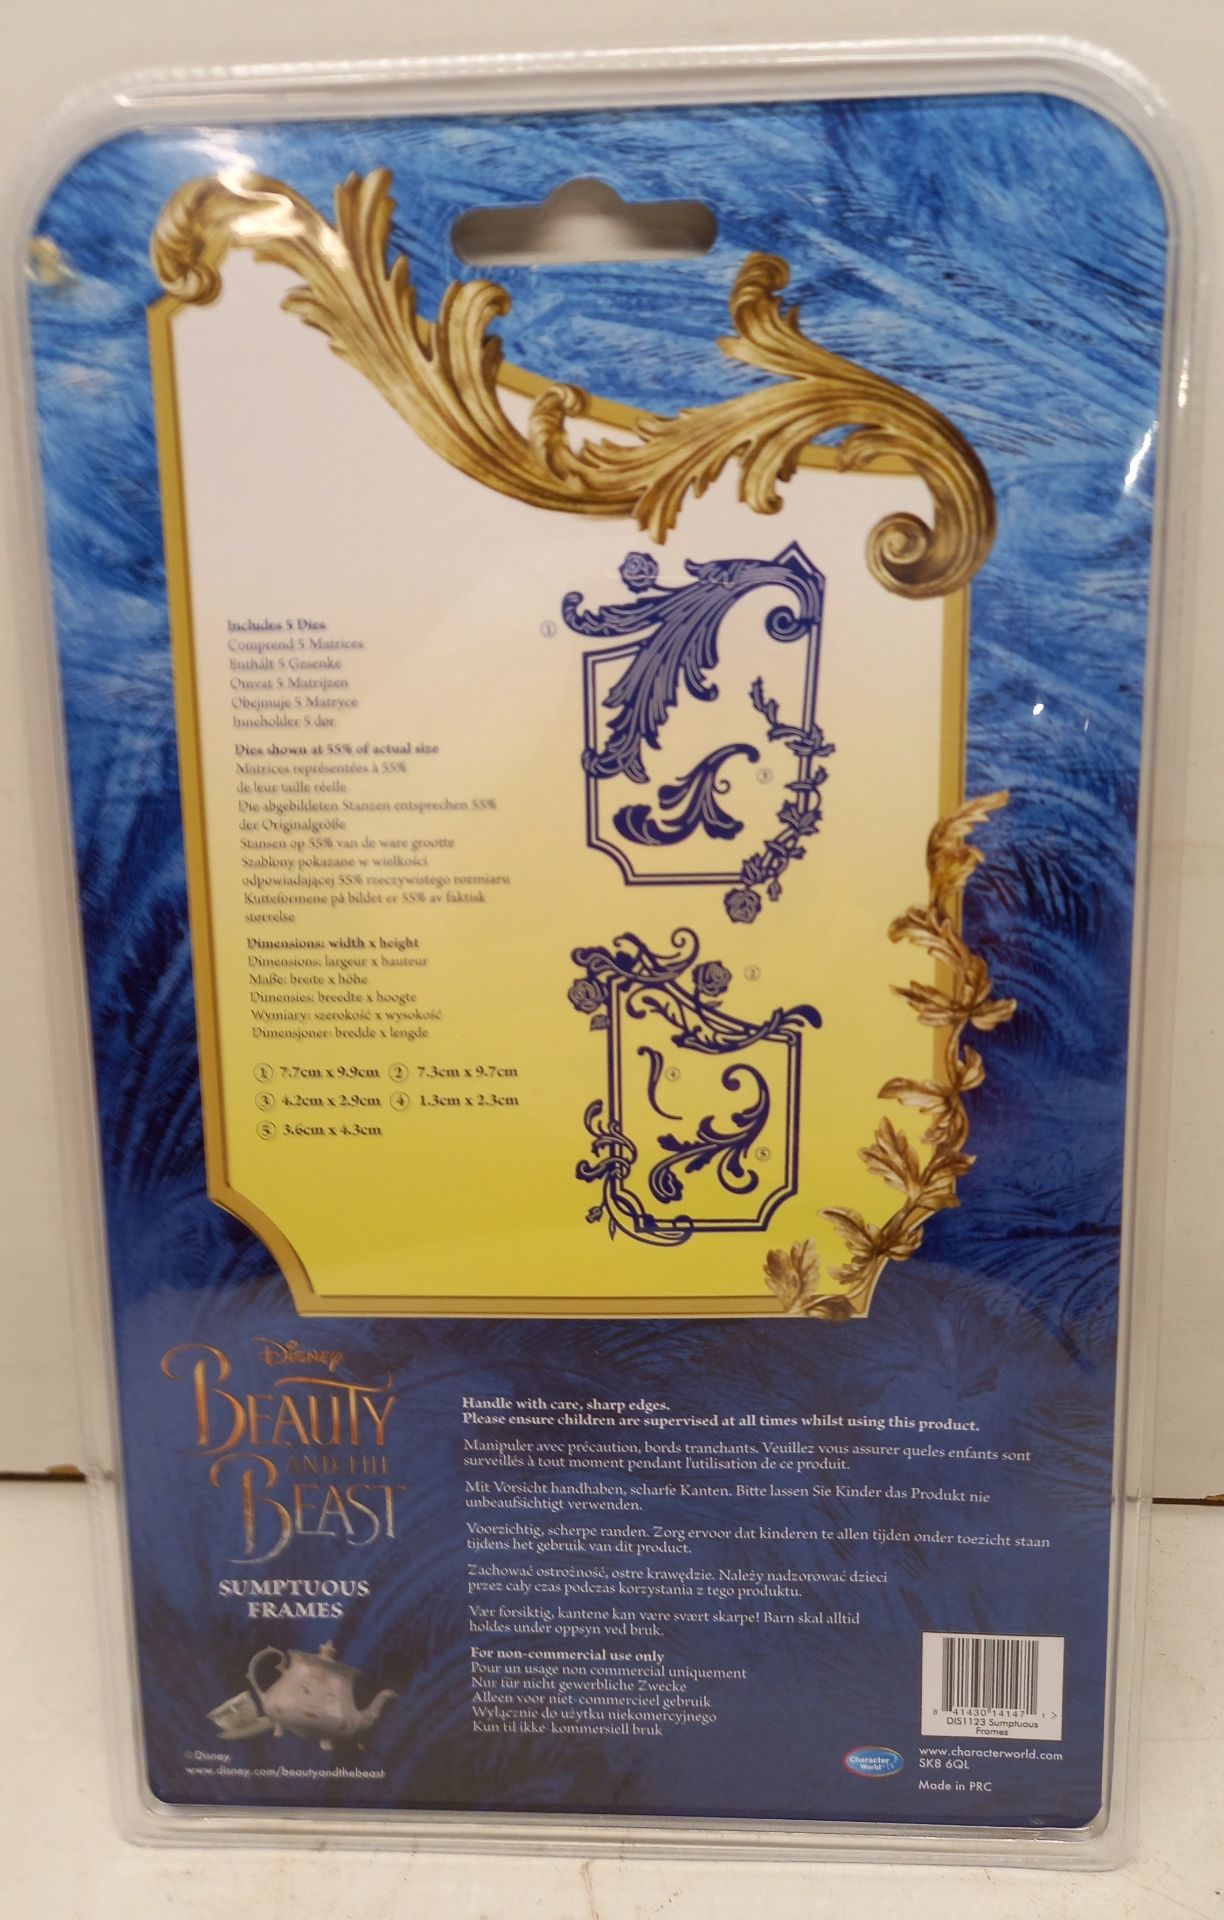 4 x Boxes Disney Beauty and The Beast Sumptuous Frames Metal Die Set - Image 2 of 2